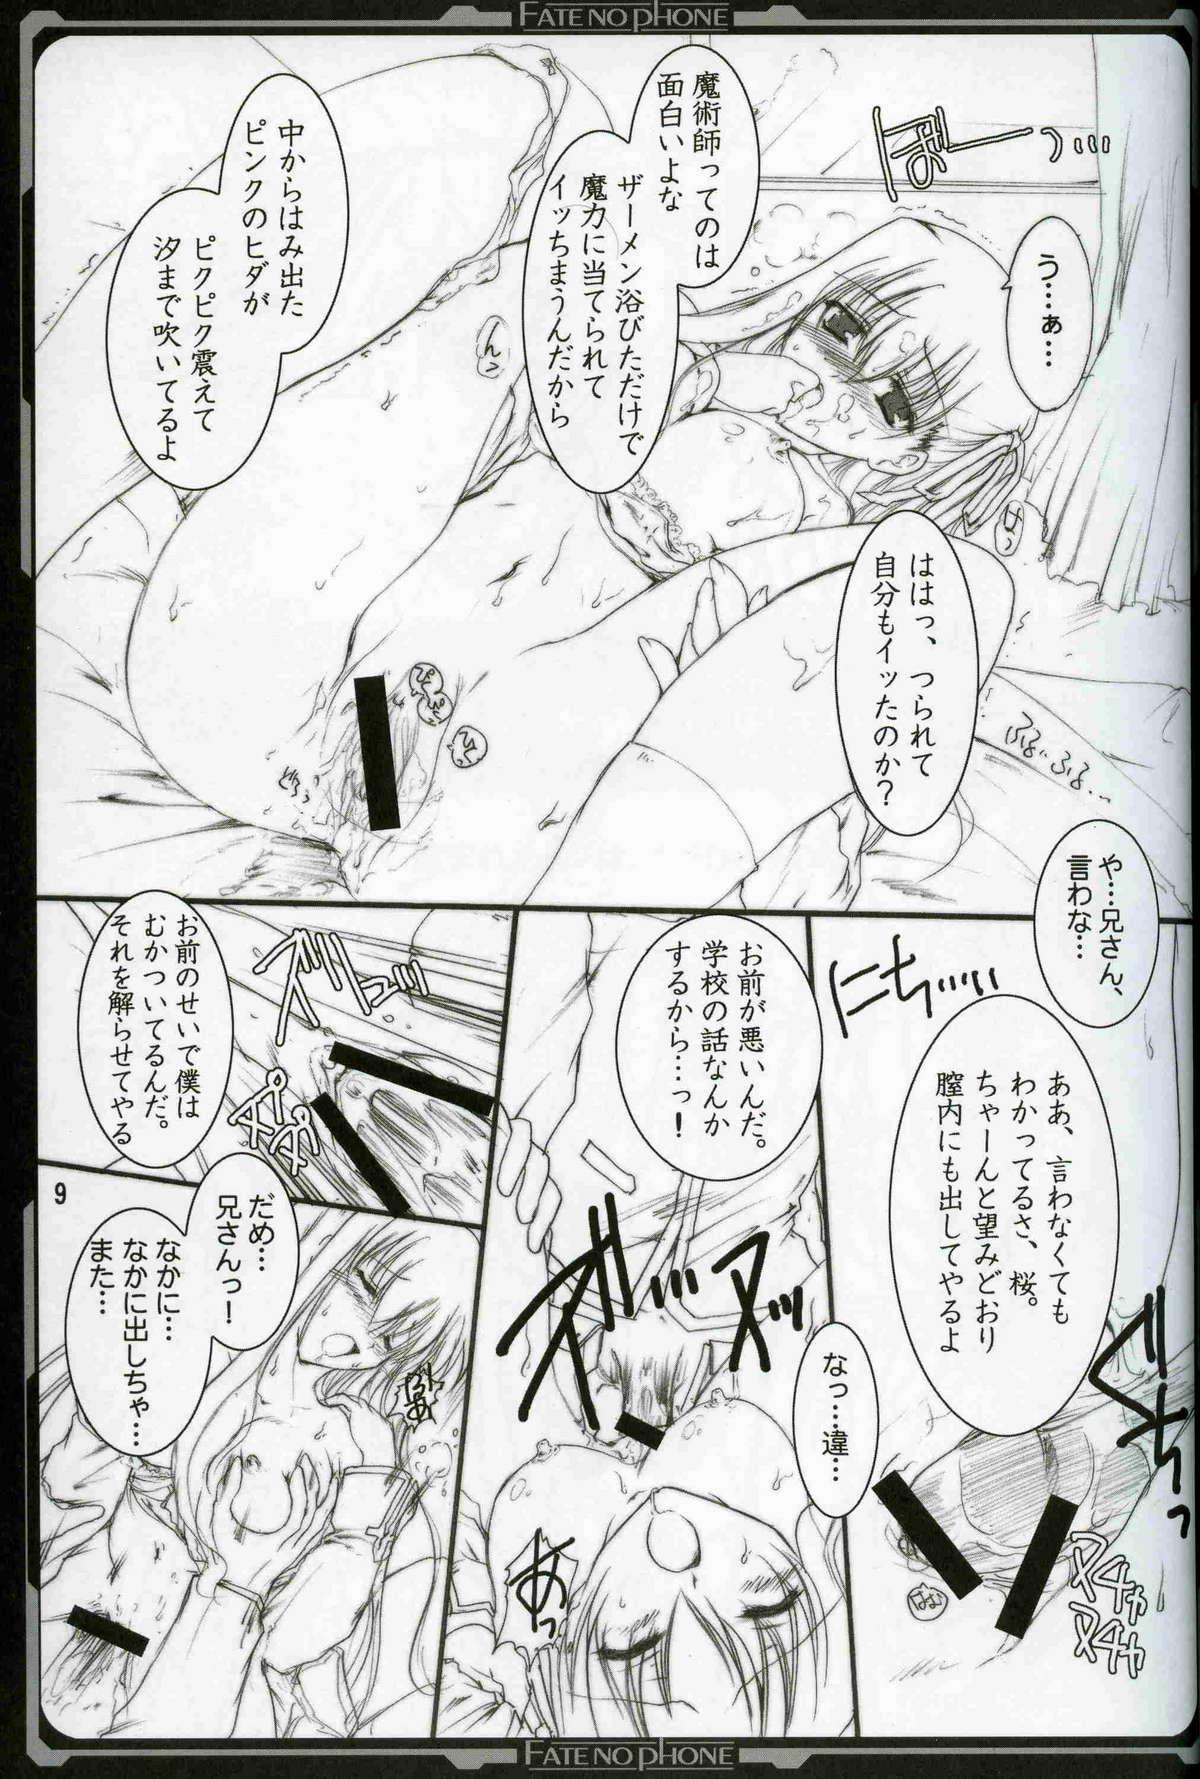 Cash Fate/no phone - Fate stay night Sissy - Page 8